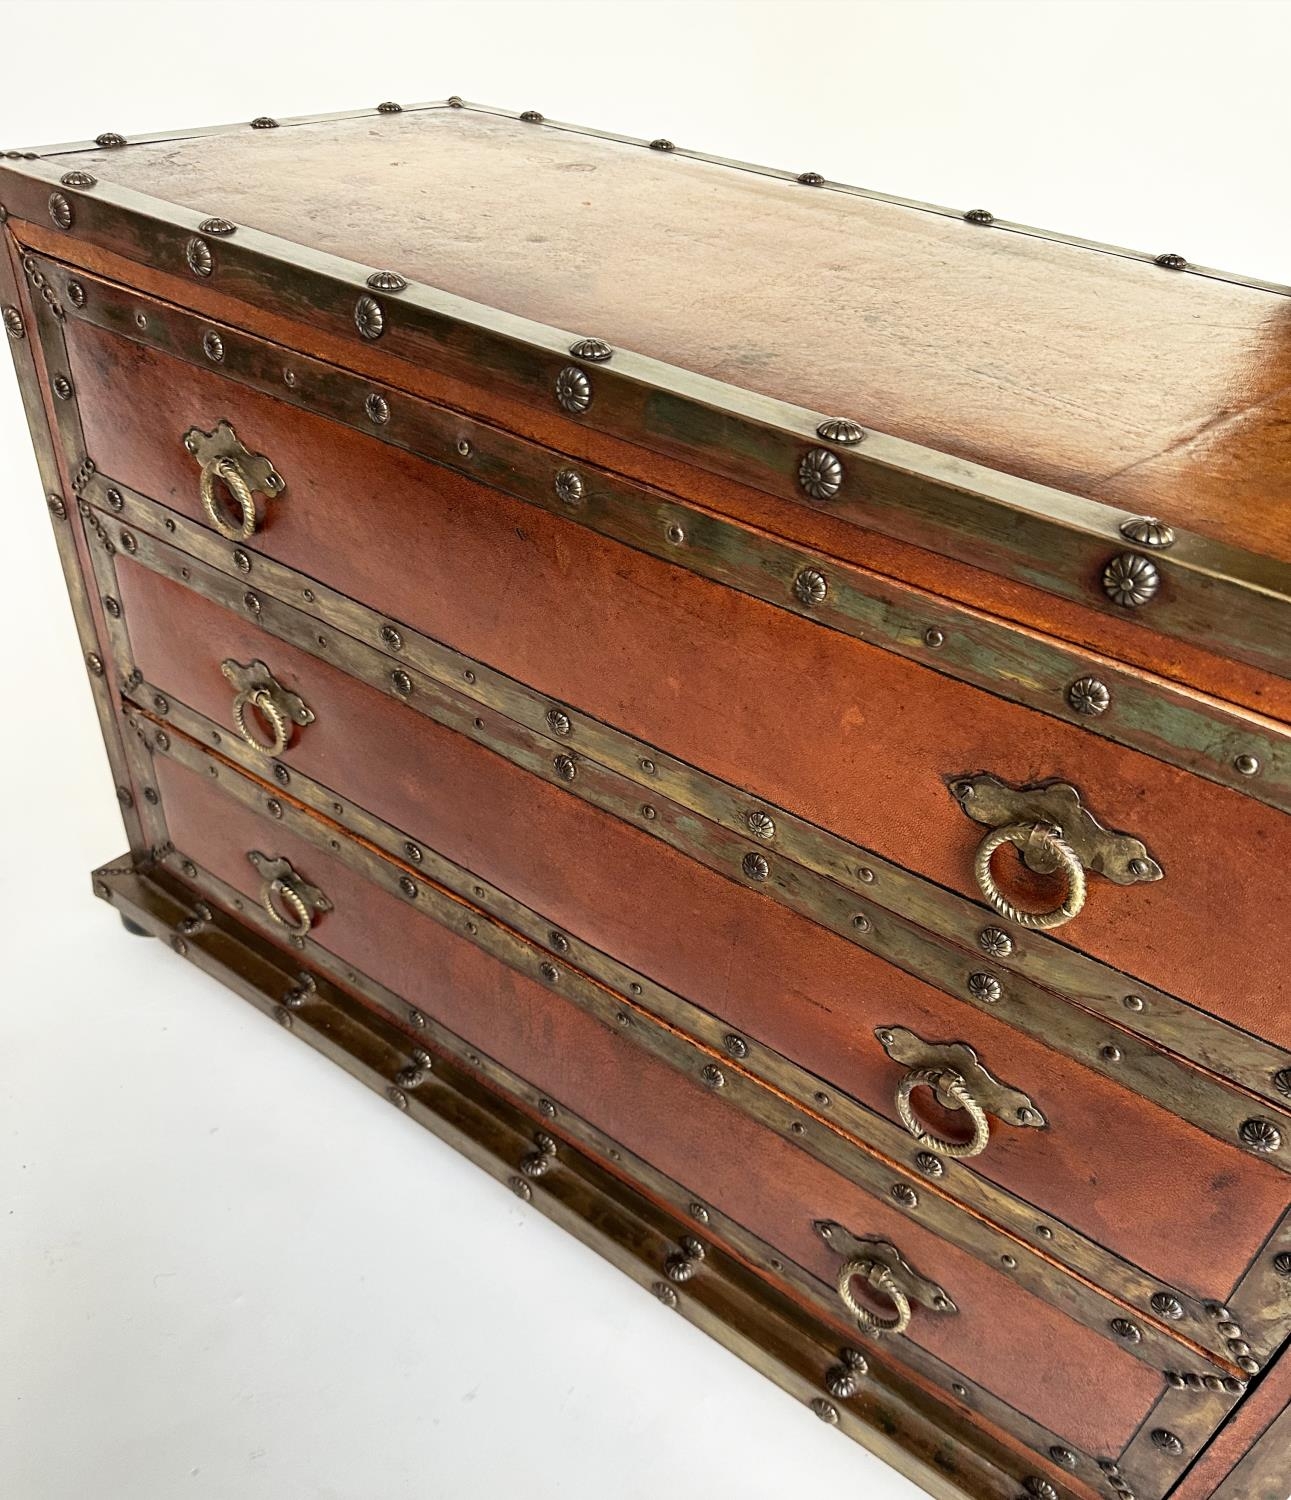 SPANISH STYLE CHEST, vintage leather and brass bound with three drawers and carrying handles, 95cm W - Image 16 of 16